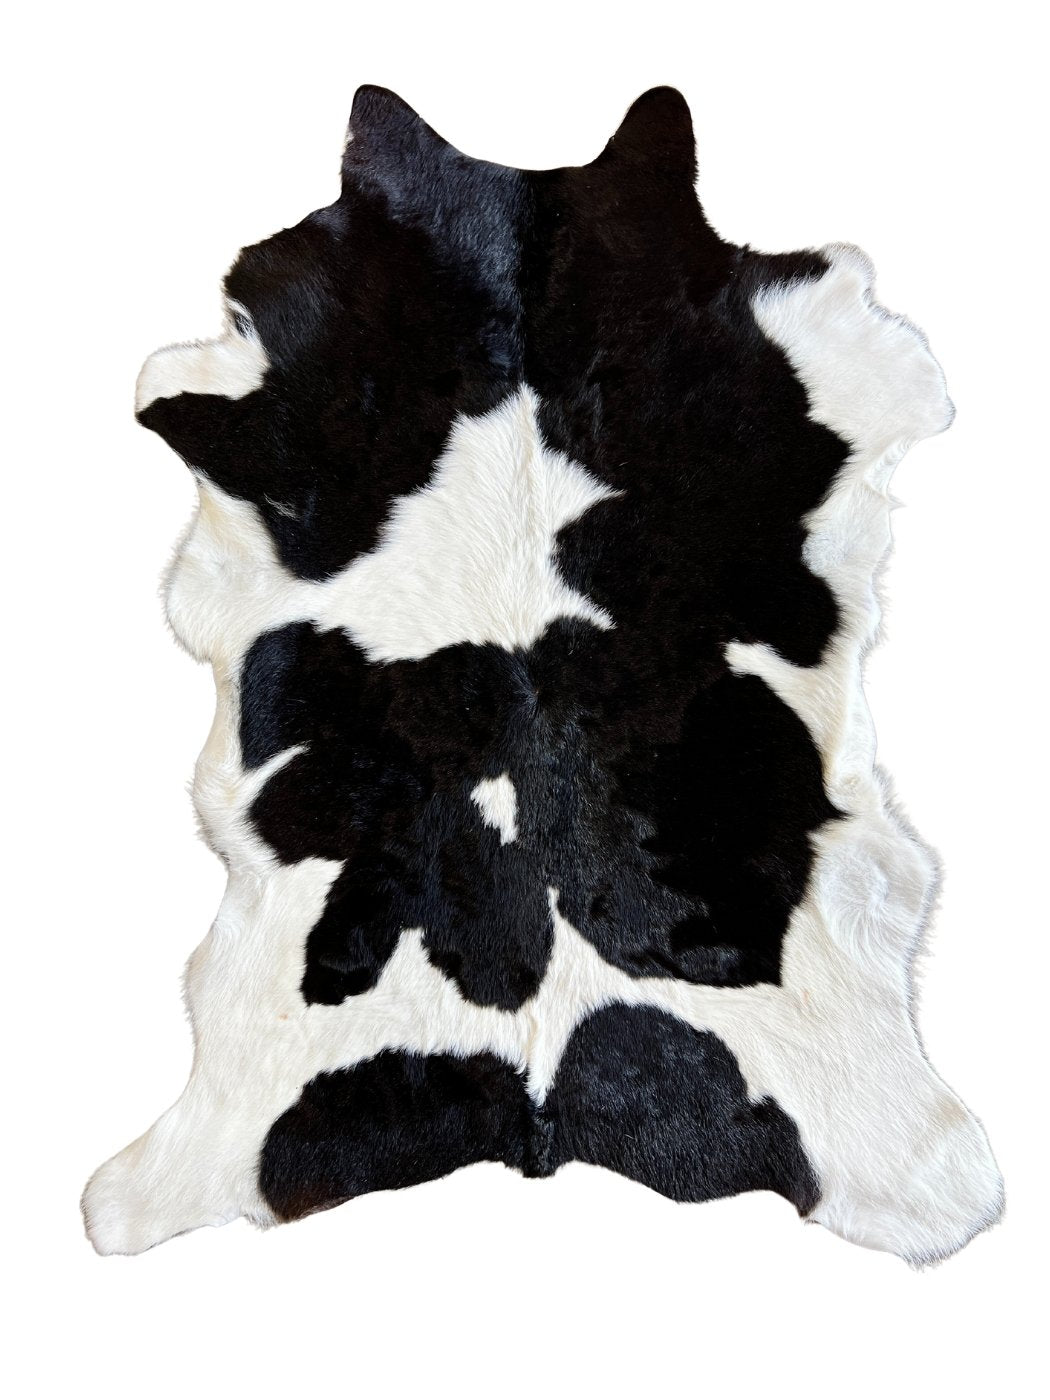 Calf Hide - Black and White - Hides & Leather Store - By Trahide - Calf Hide